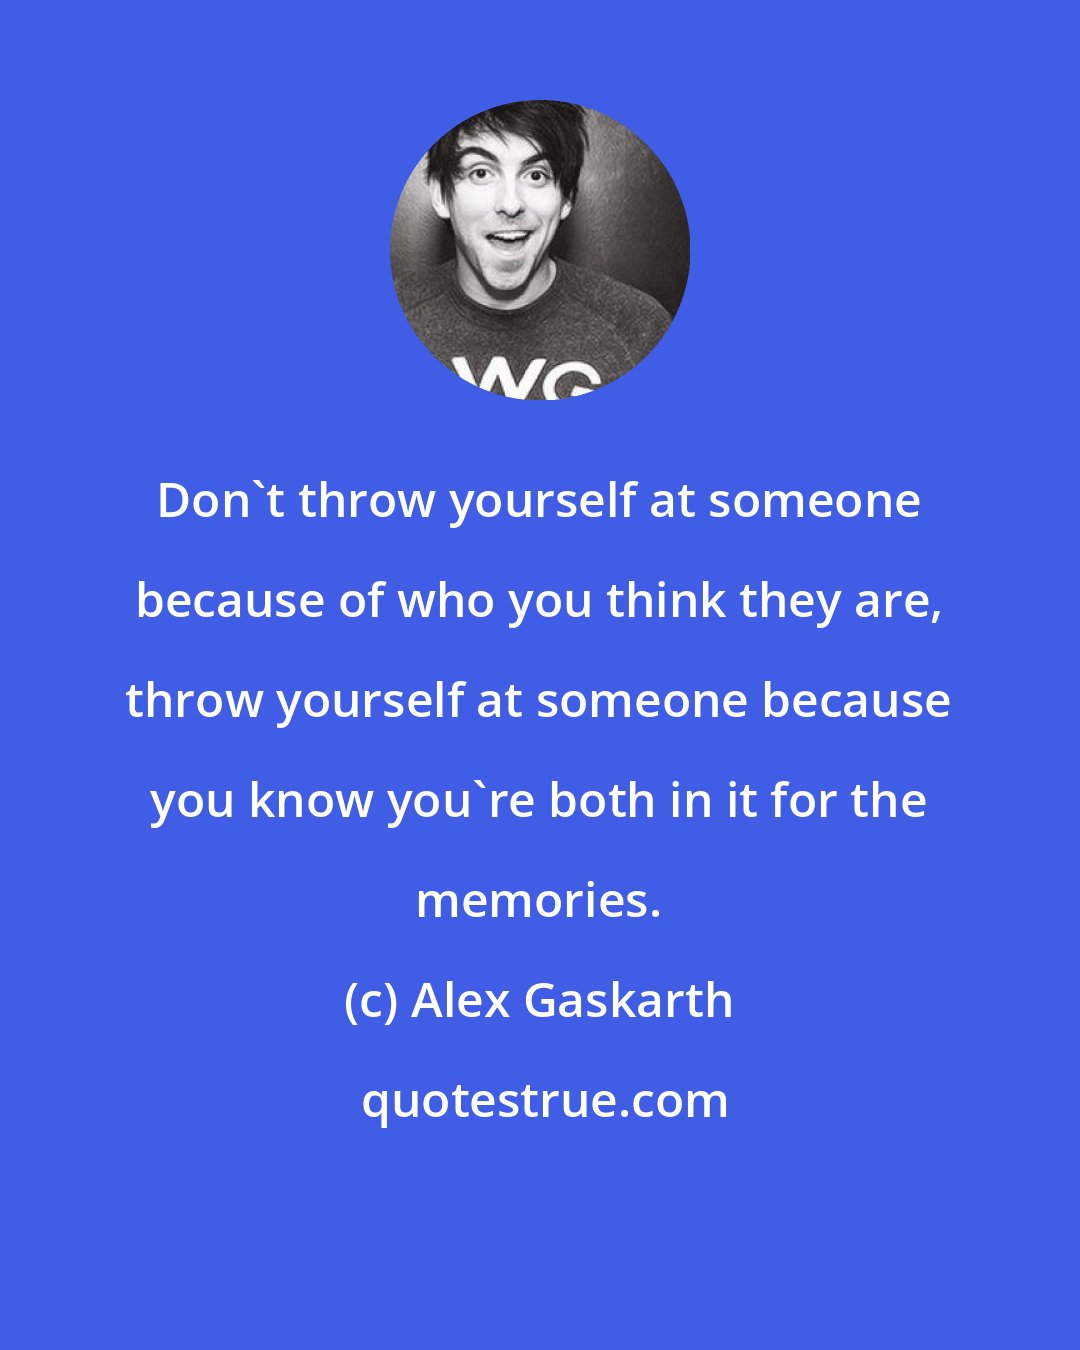 Alex Gaskarth: Don't throw yourself at someone because of who you think they are, throw yourself at someone because you know you're both in it for the memories.